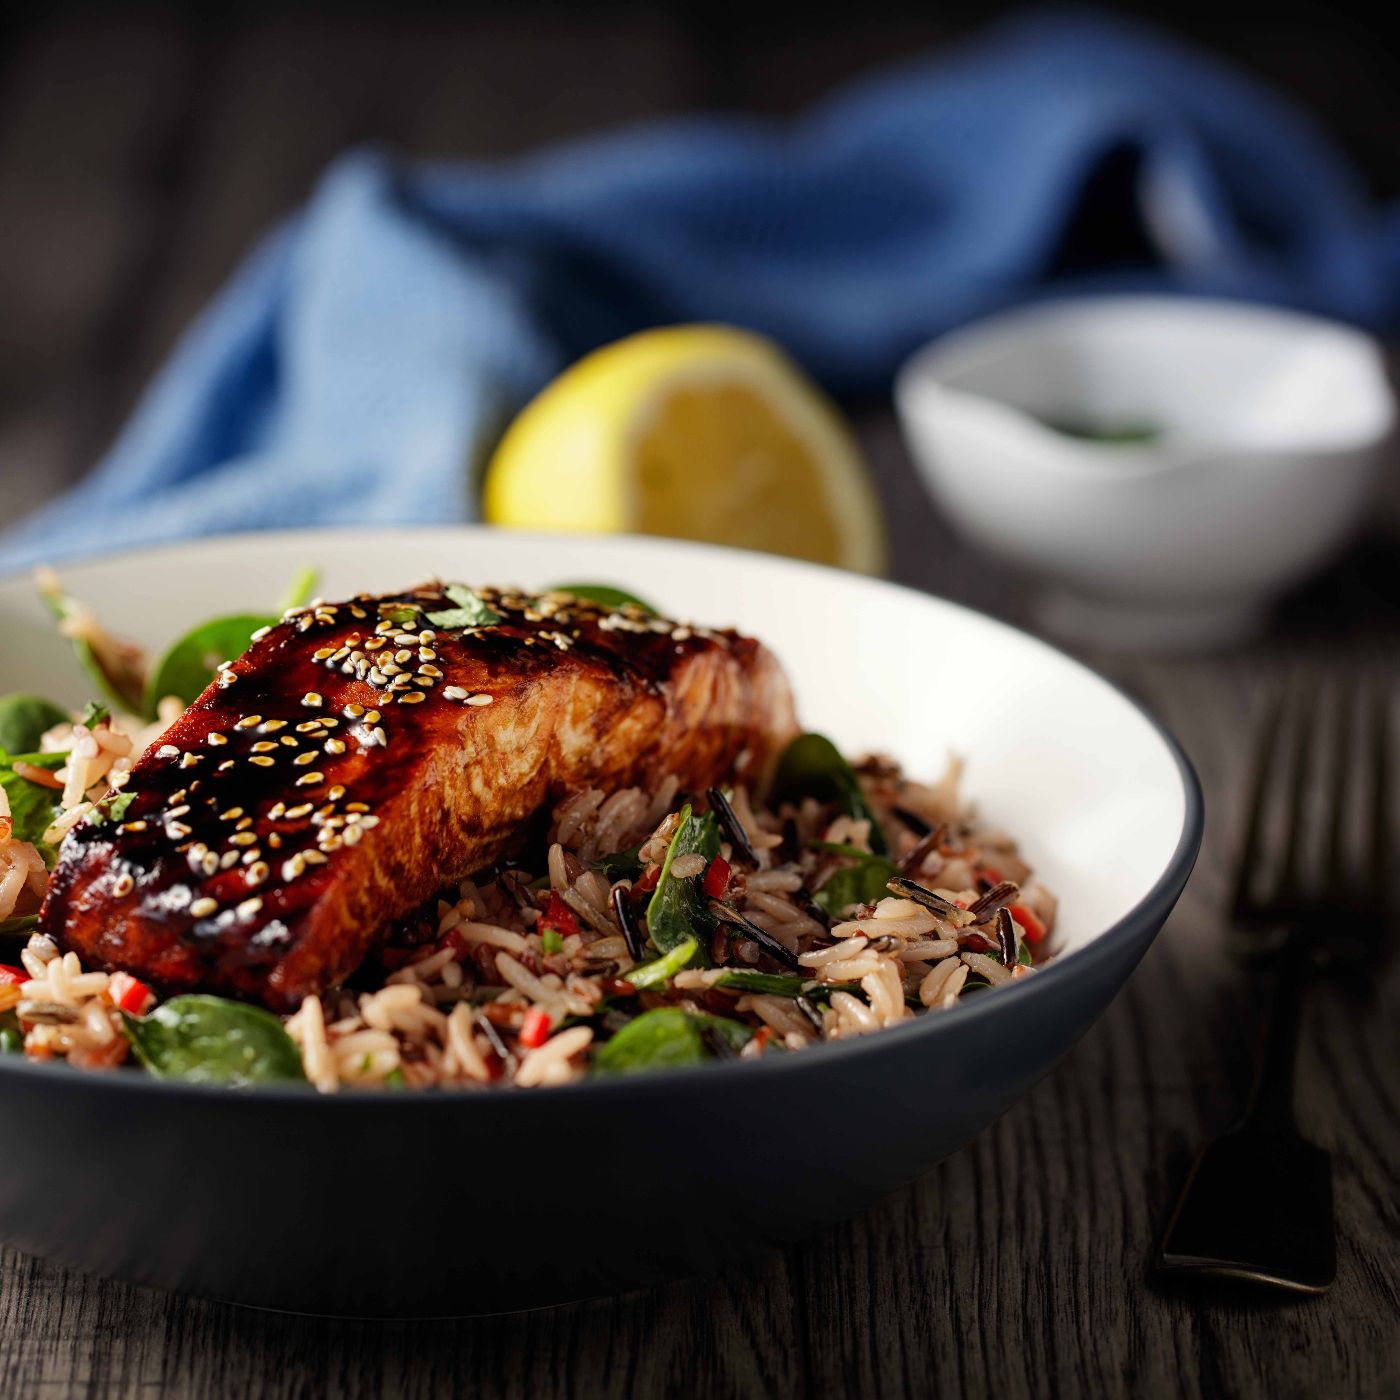 Healthy-wild-rice-salad-with-grilled-teriyaki--salmon-fillet-950469676_8660x5773_square.jpg